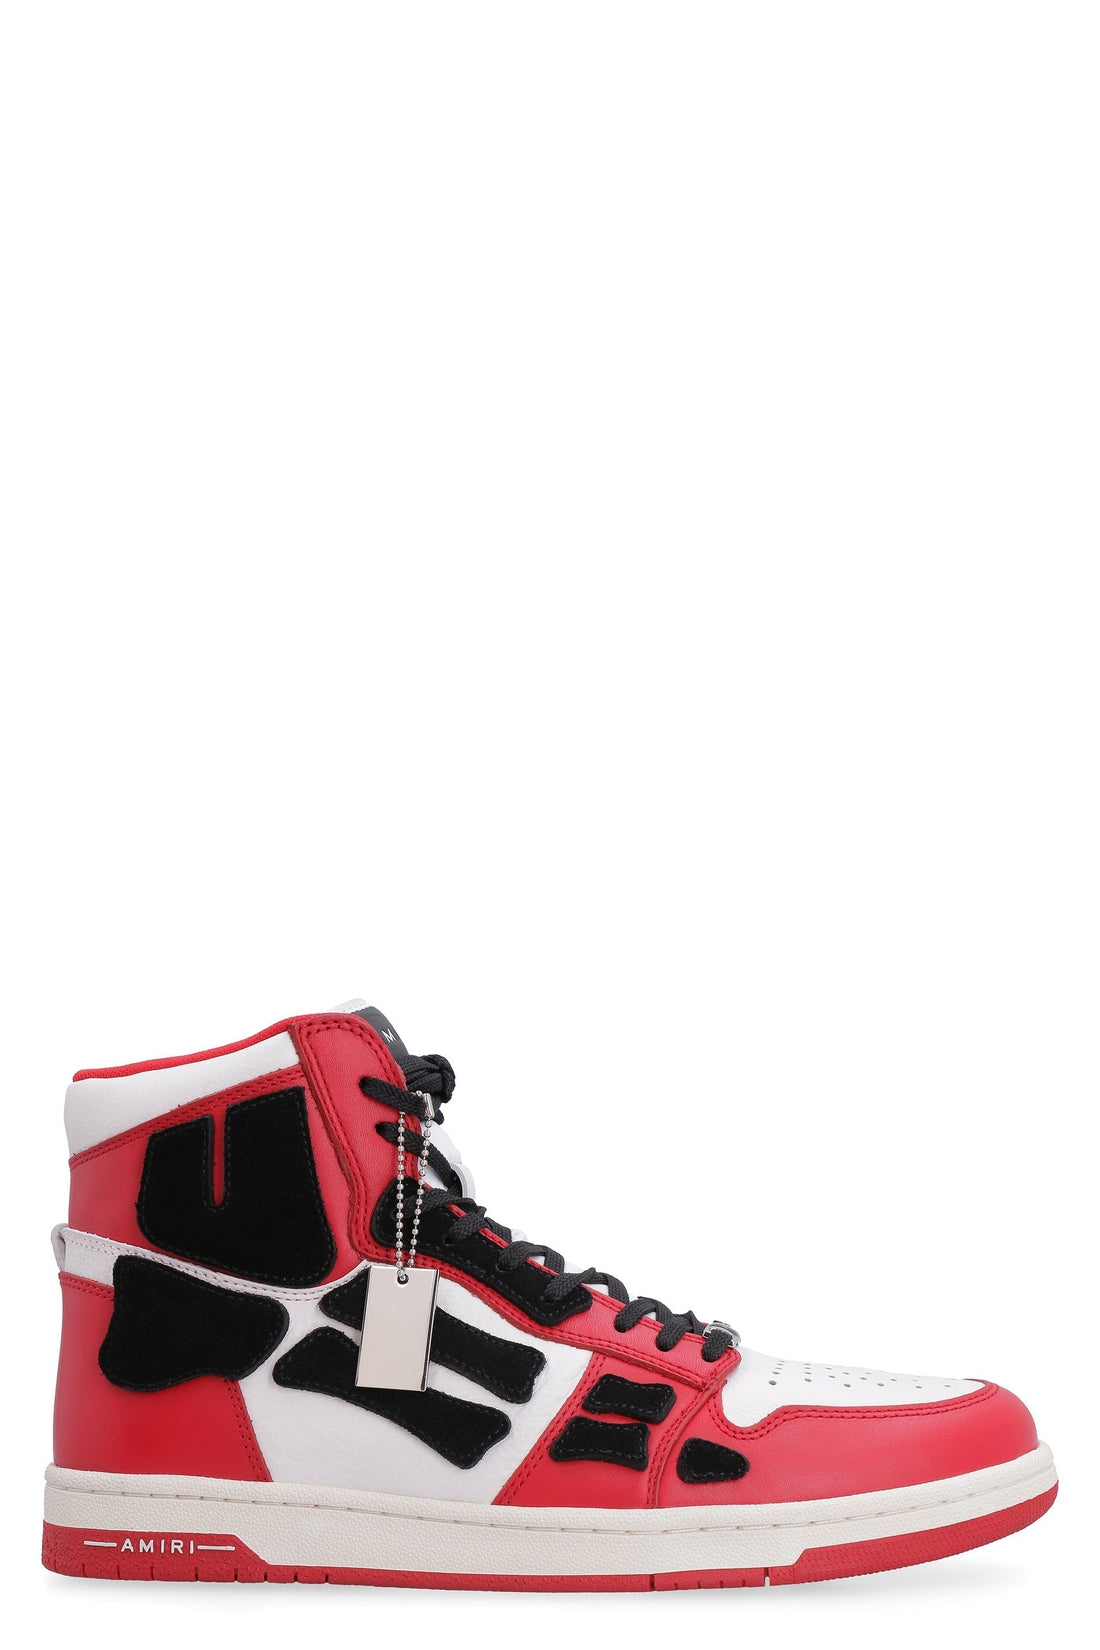 AMIRI-OUTLET-SALE-Skel leather high-top sneakers-ARCHIVIST